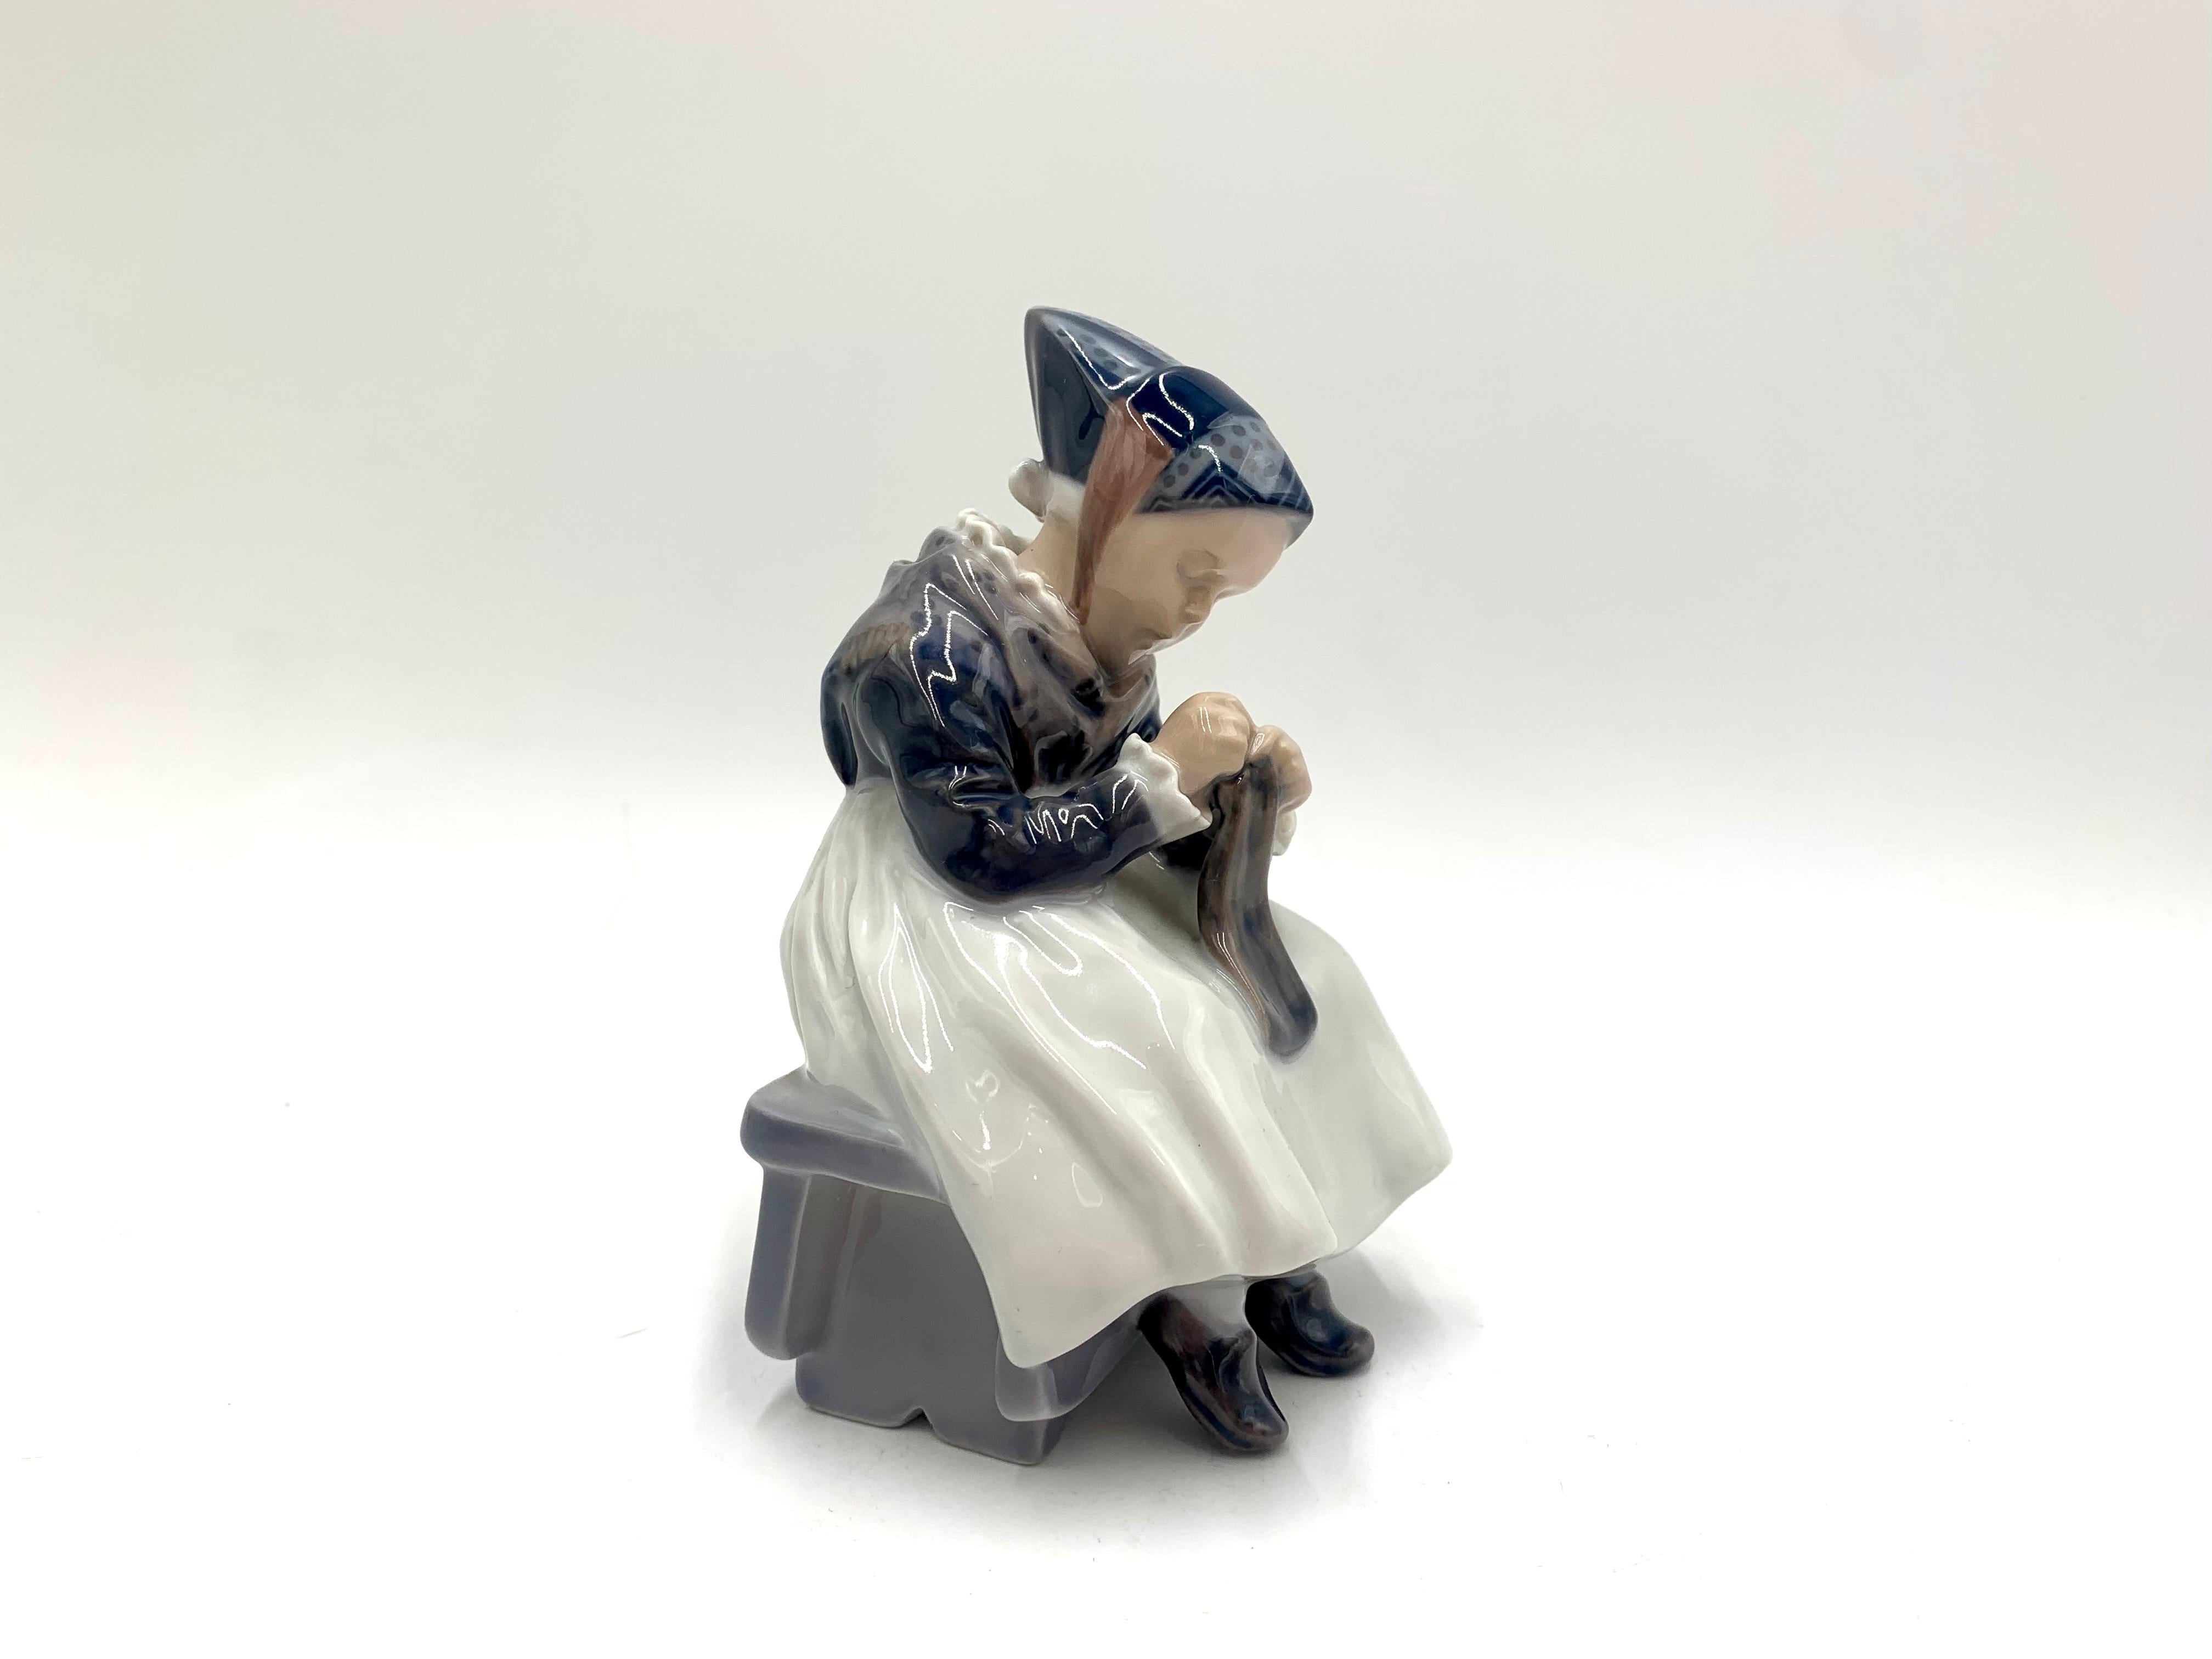 Porcelain figurine of a sewing woman in regional costume.

Made in Denmark by the Royal Copenhagen manufactory

Manufactured in 1957.

Model number # 1314

Very good condition, no damage.

Measures: height 15cm, width 10cm, depth 9cm.